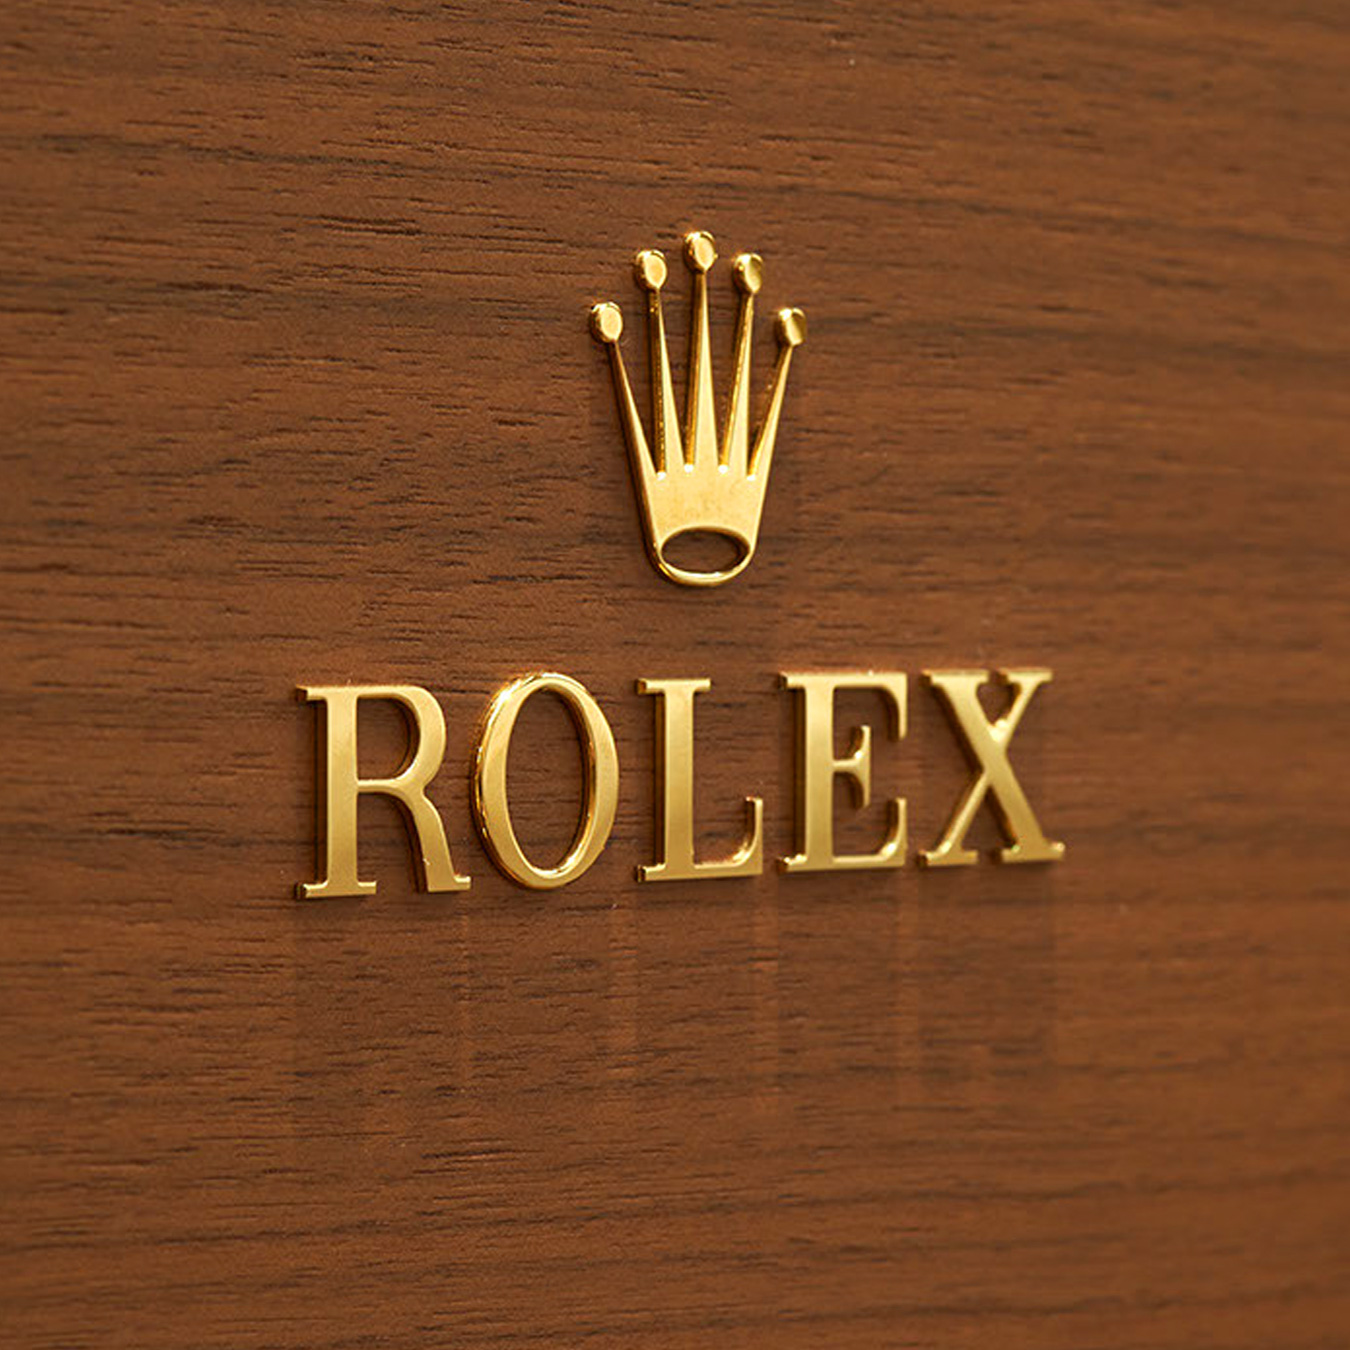 The Rolex logo at Baker Brothers in Bedford